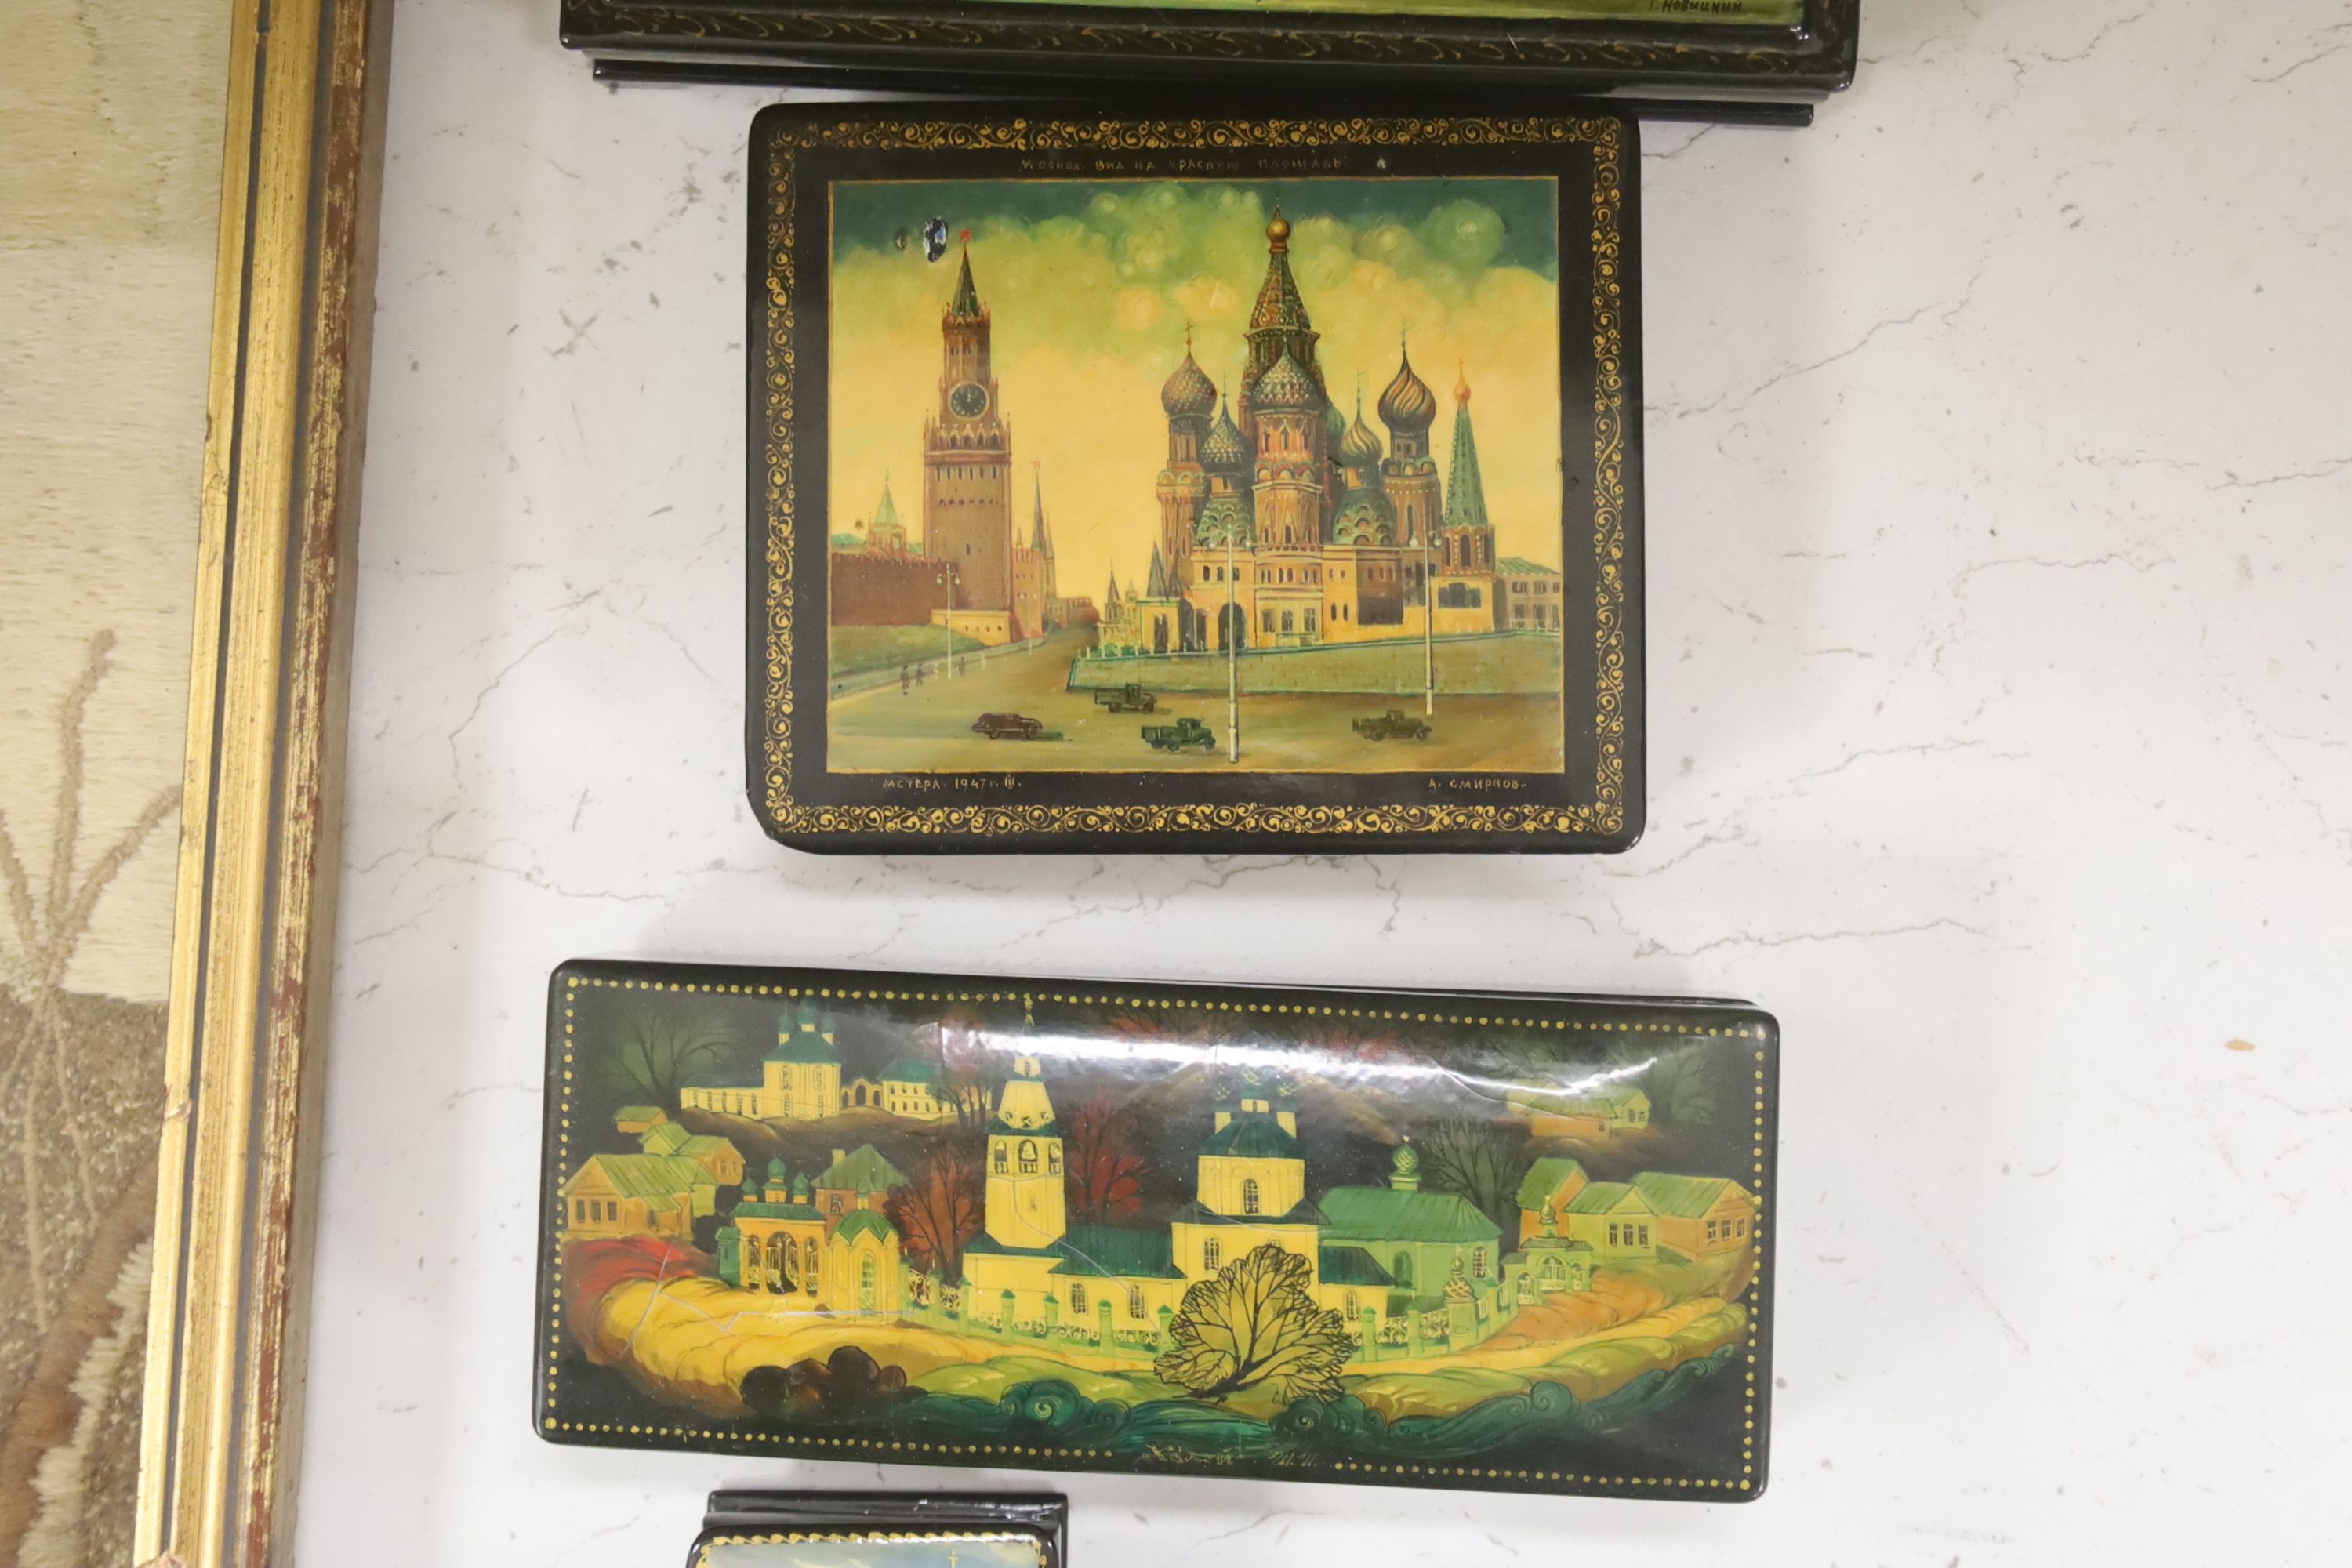 Six Russian Papier mache boxes, each decorated with churches or cathedrals, largest 17 cm